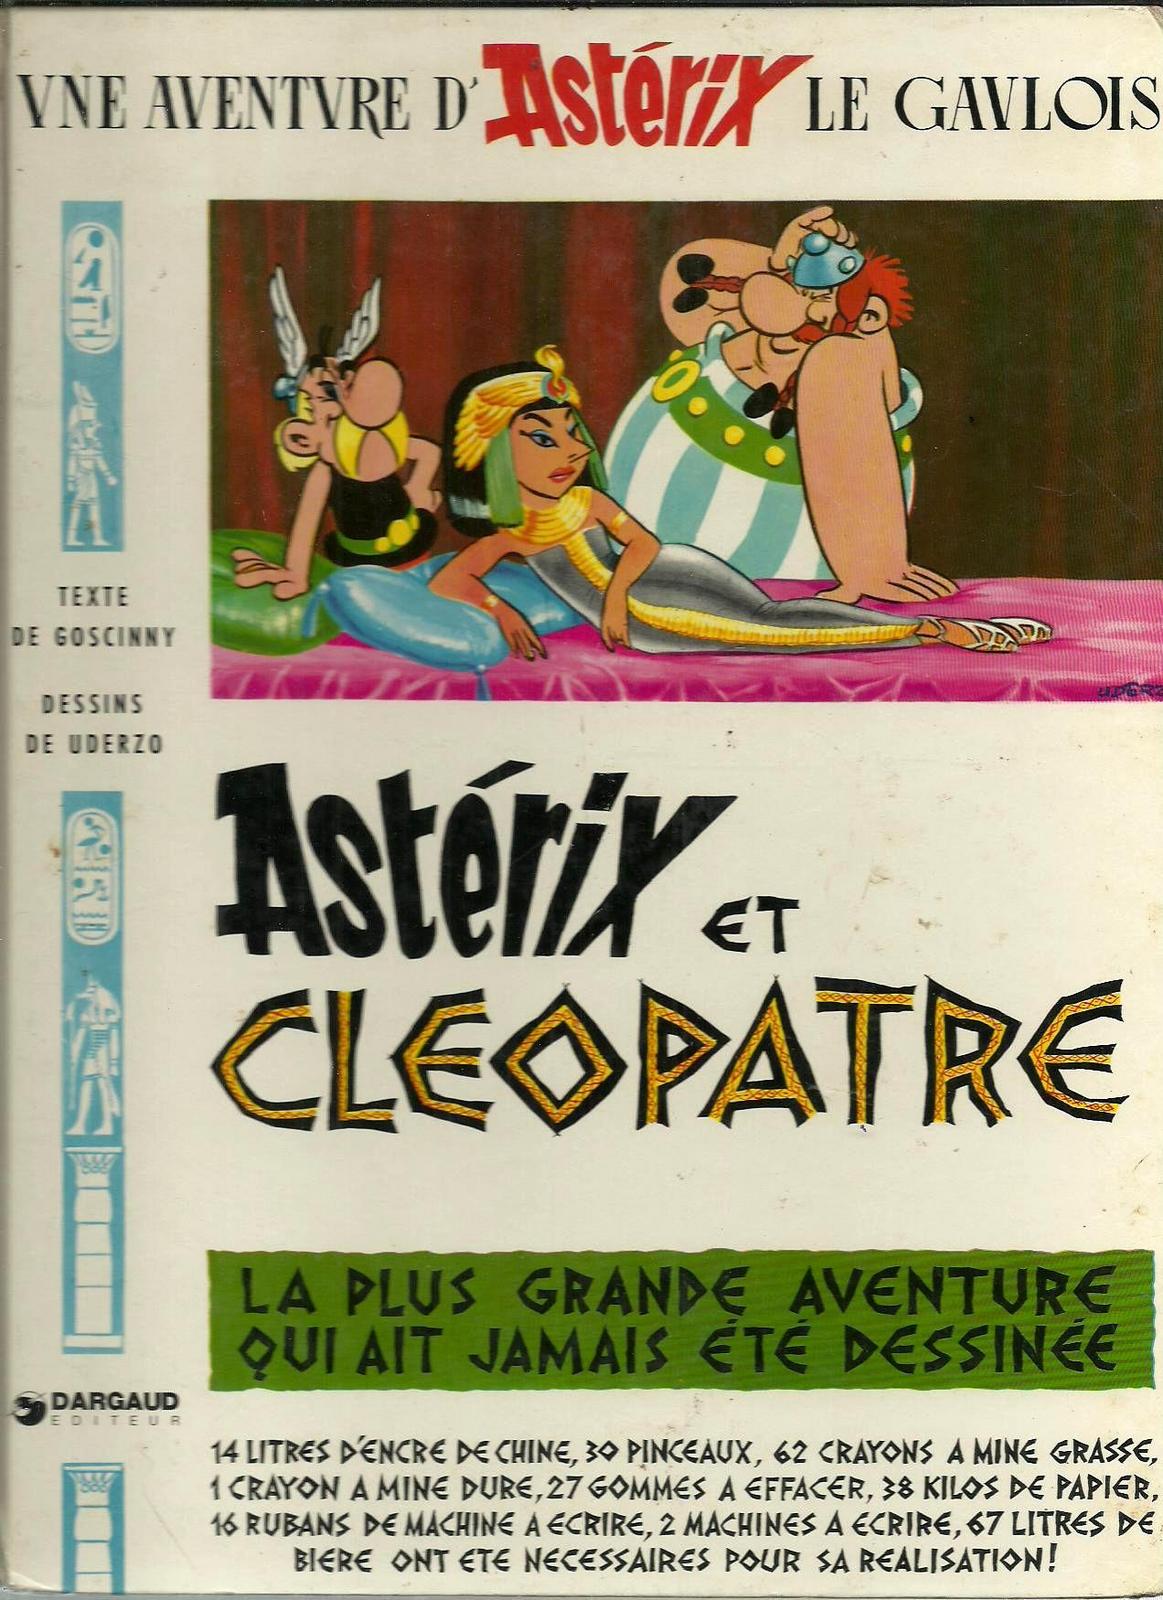 Asterix et Cleopatre (Hardcover, French language, 1985, Dargaud)